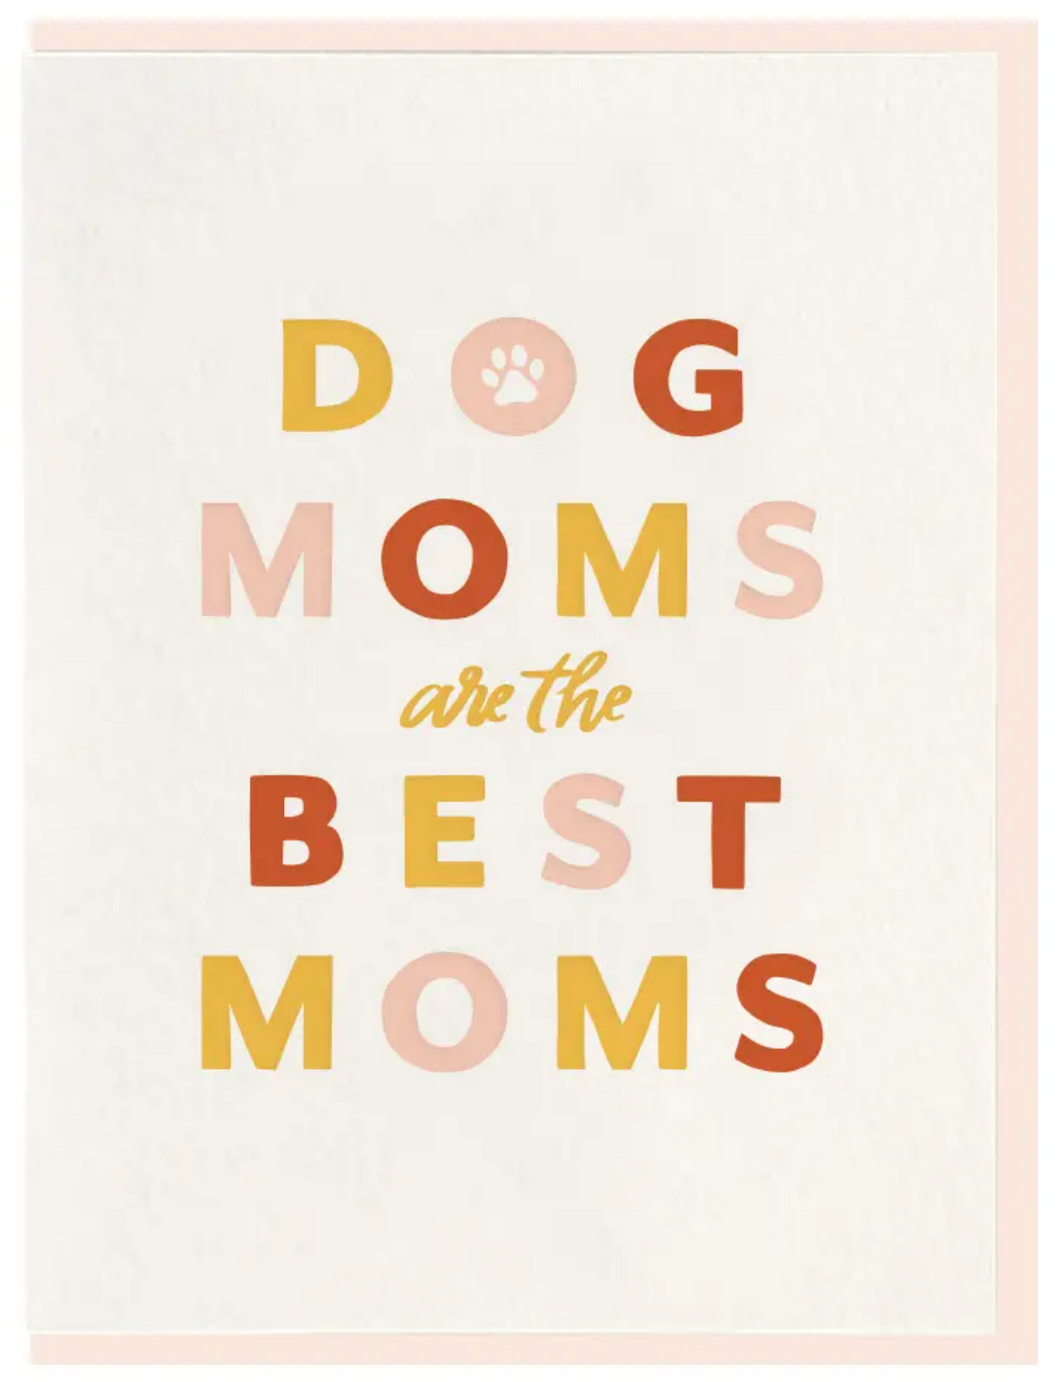 Dog Mom Mother's Day Card